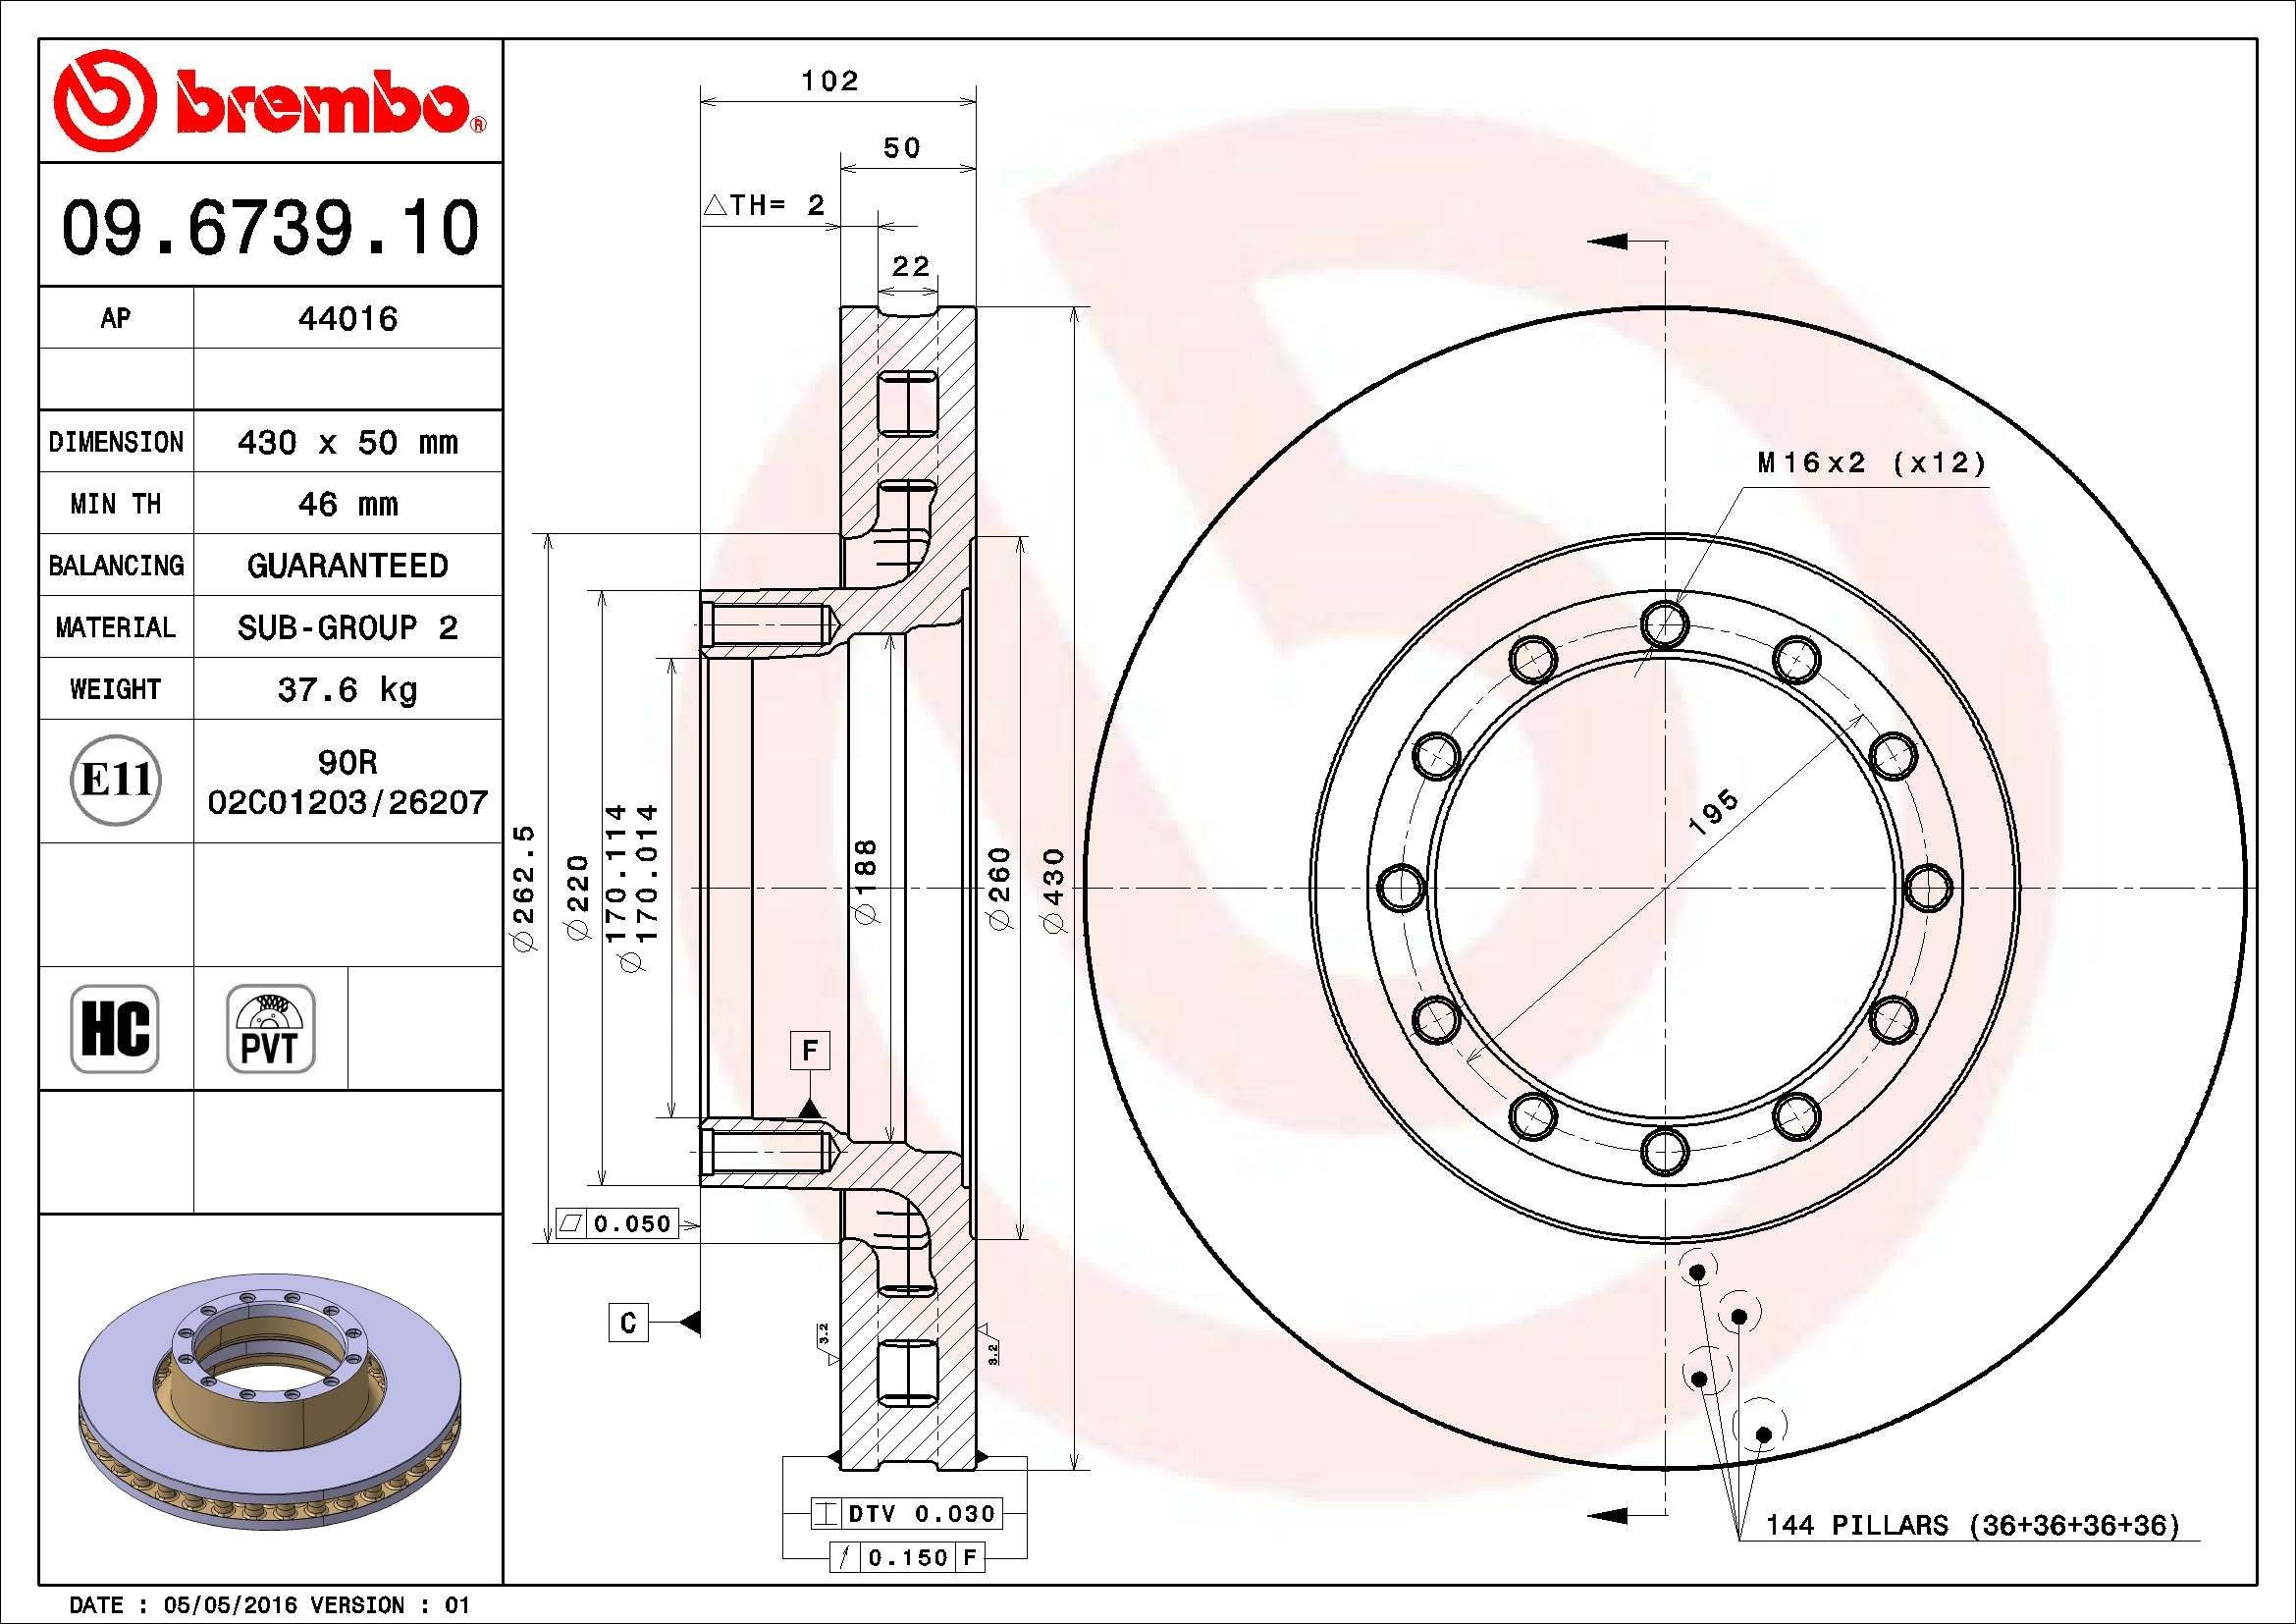 09.6739.10 BREMBO Bremsscheibe IVECO EuroTech MT